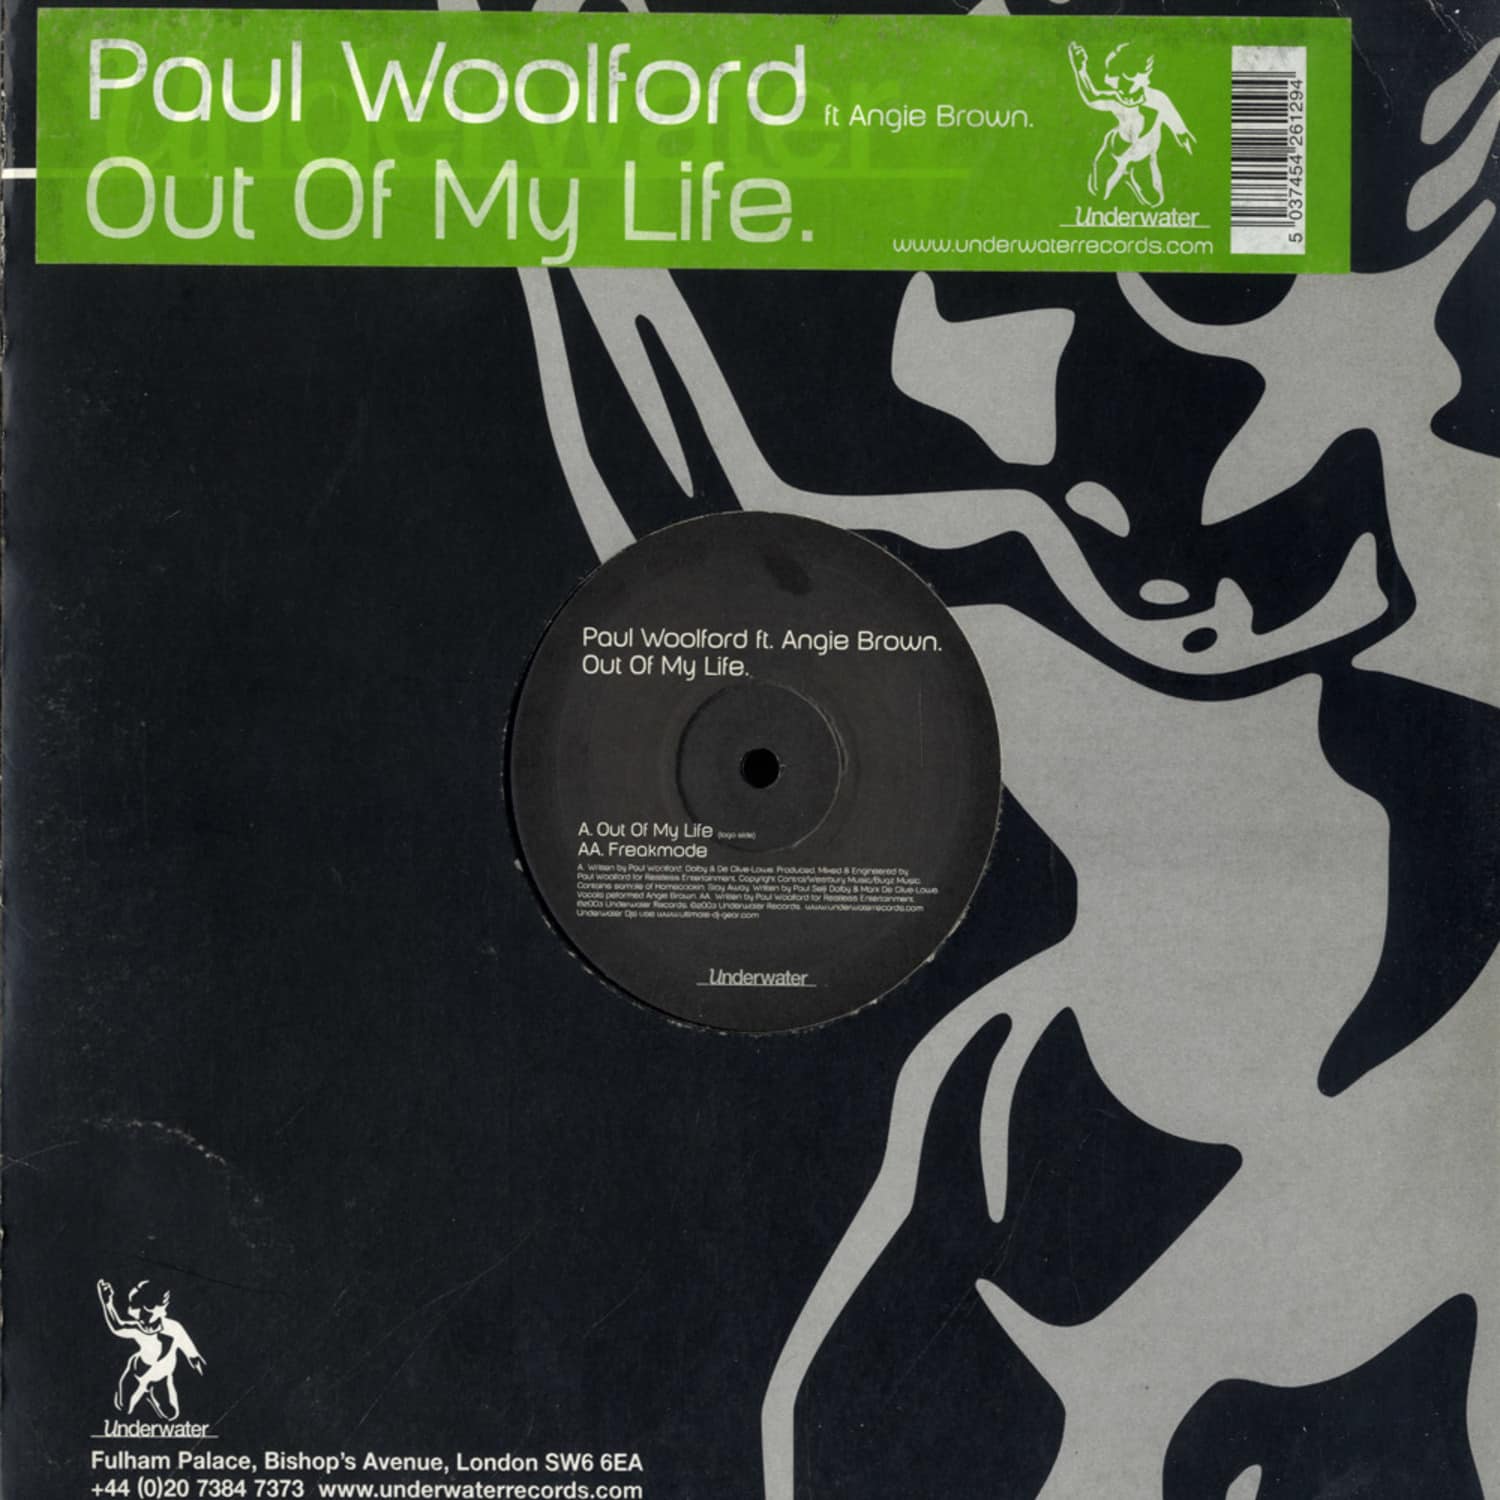 Paul Woolford - OUT OF MY LIFE